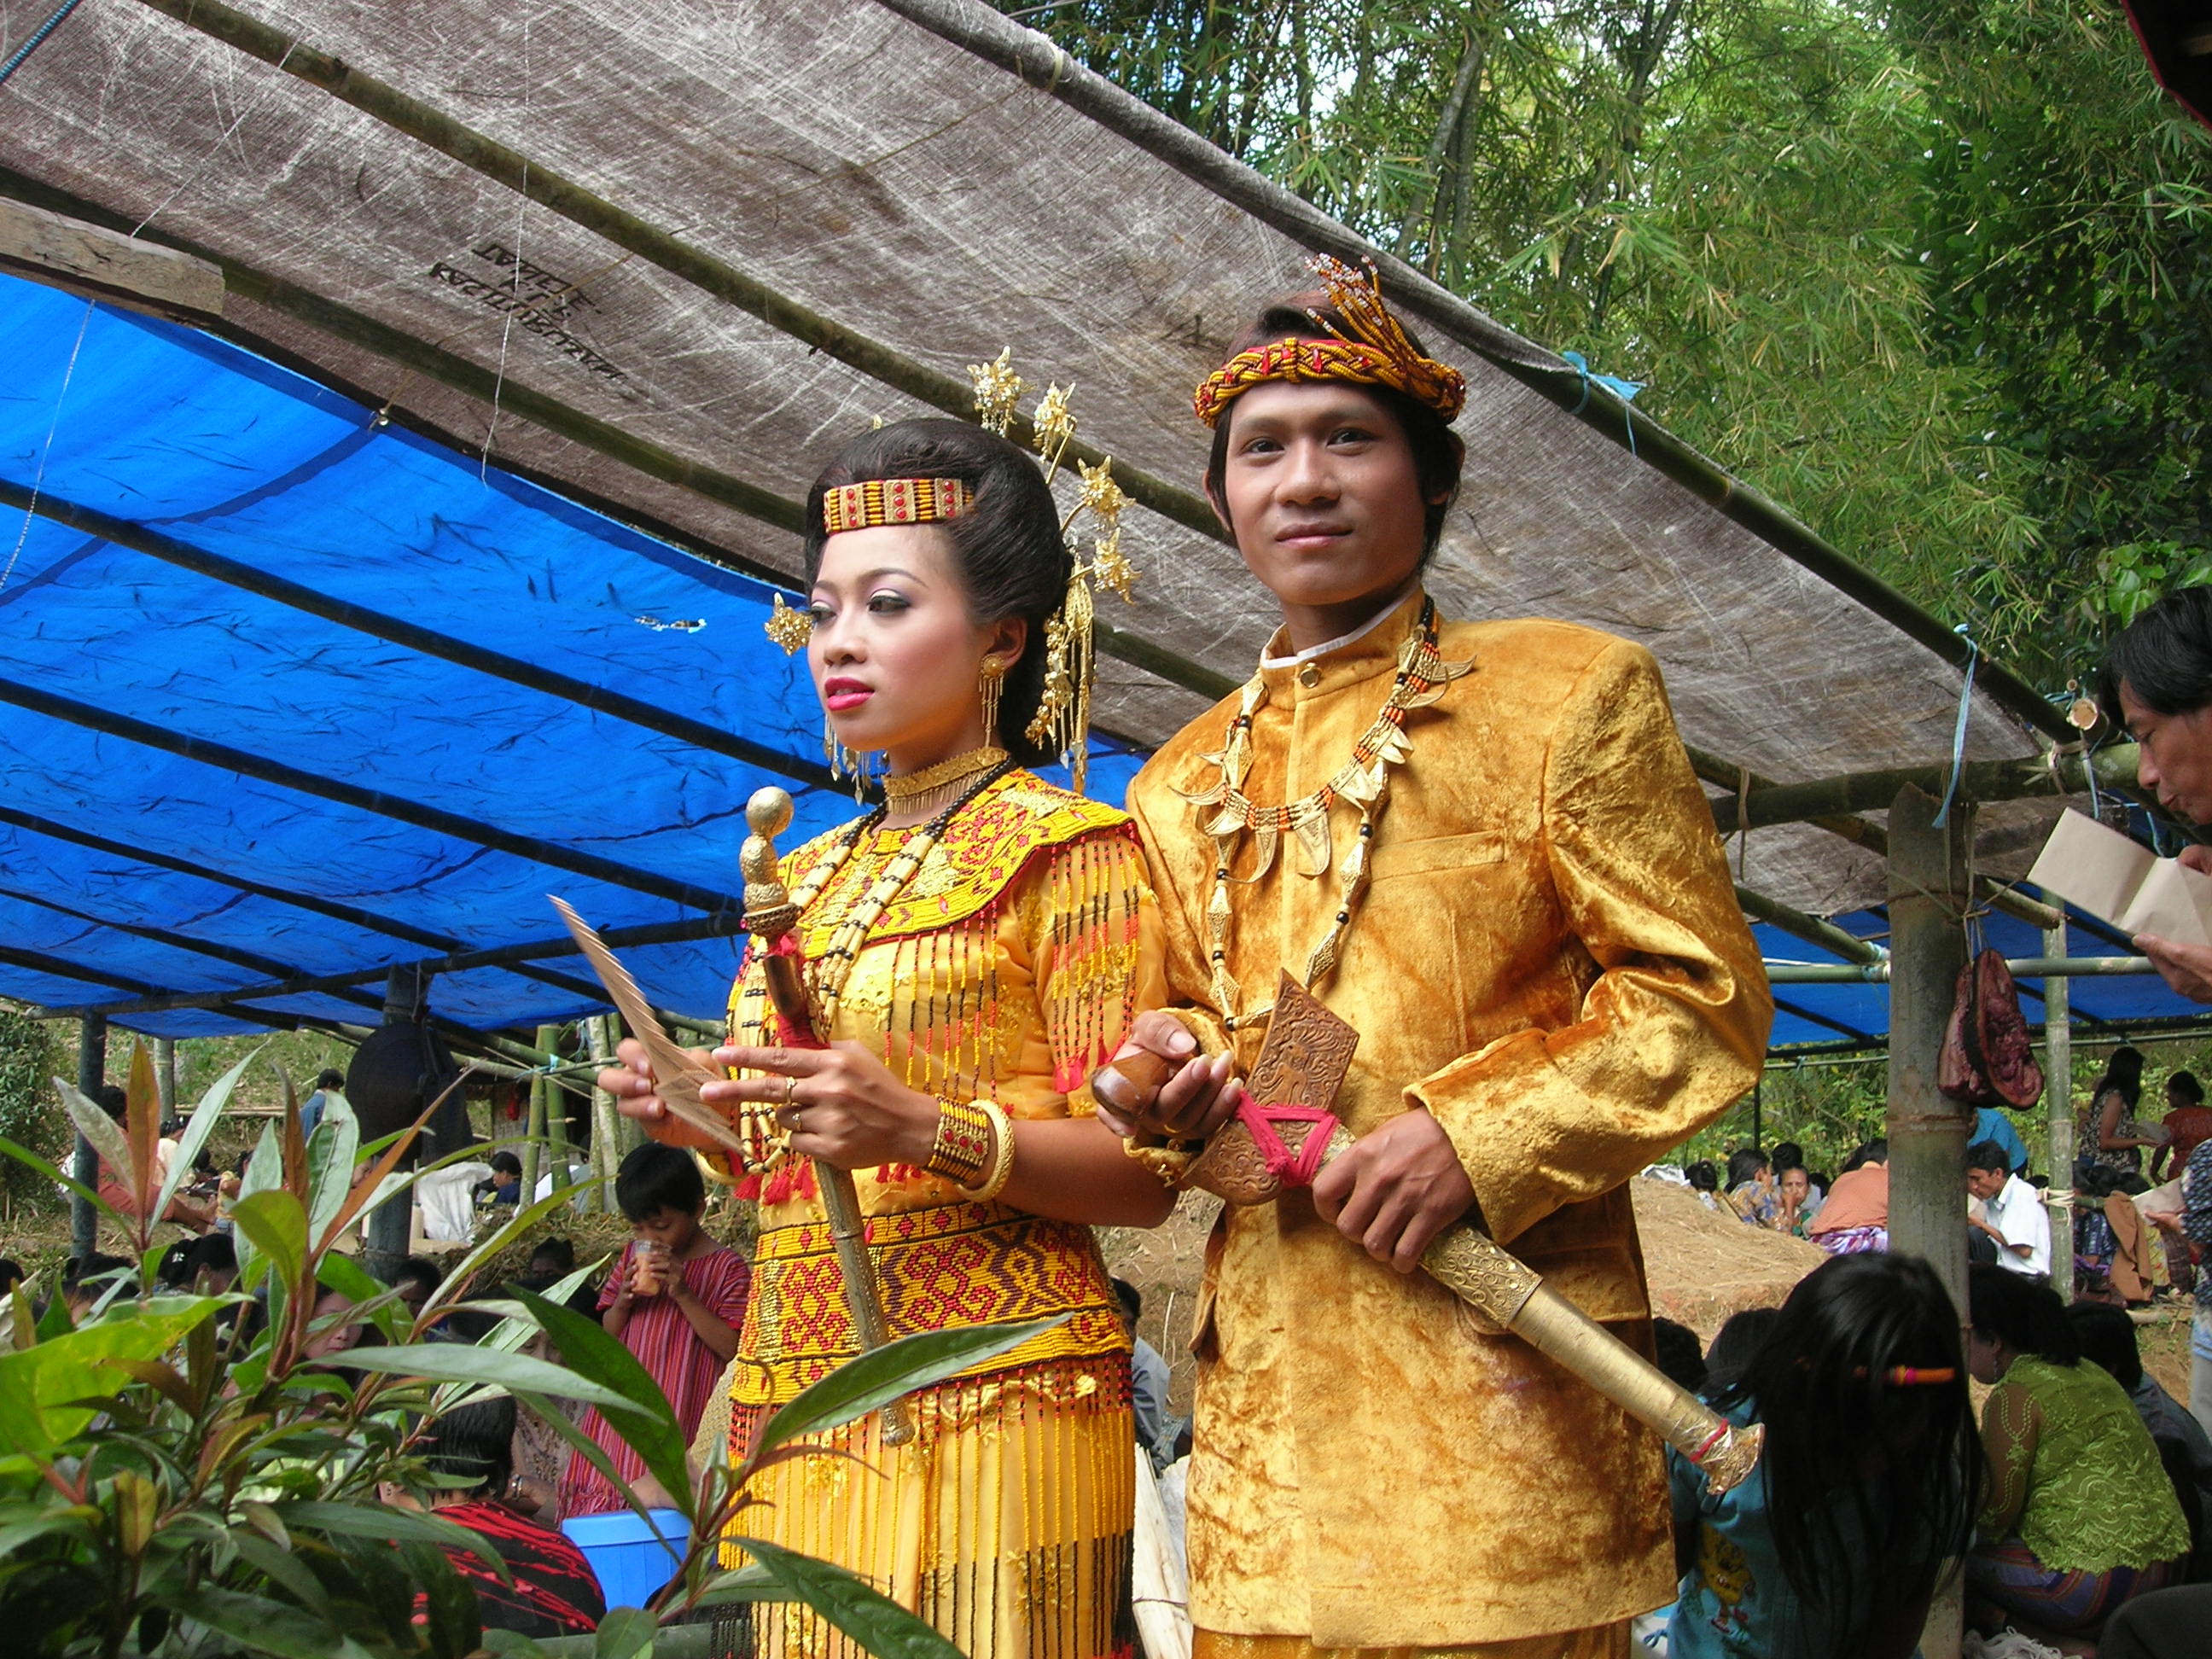 A Wedding in Sulawesi | Nothing Else Matters2592 x 1944